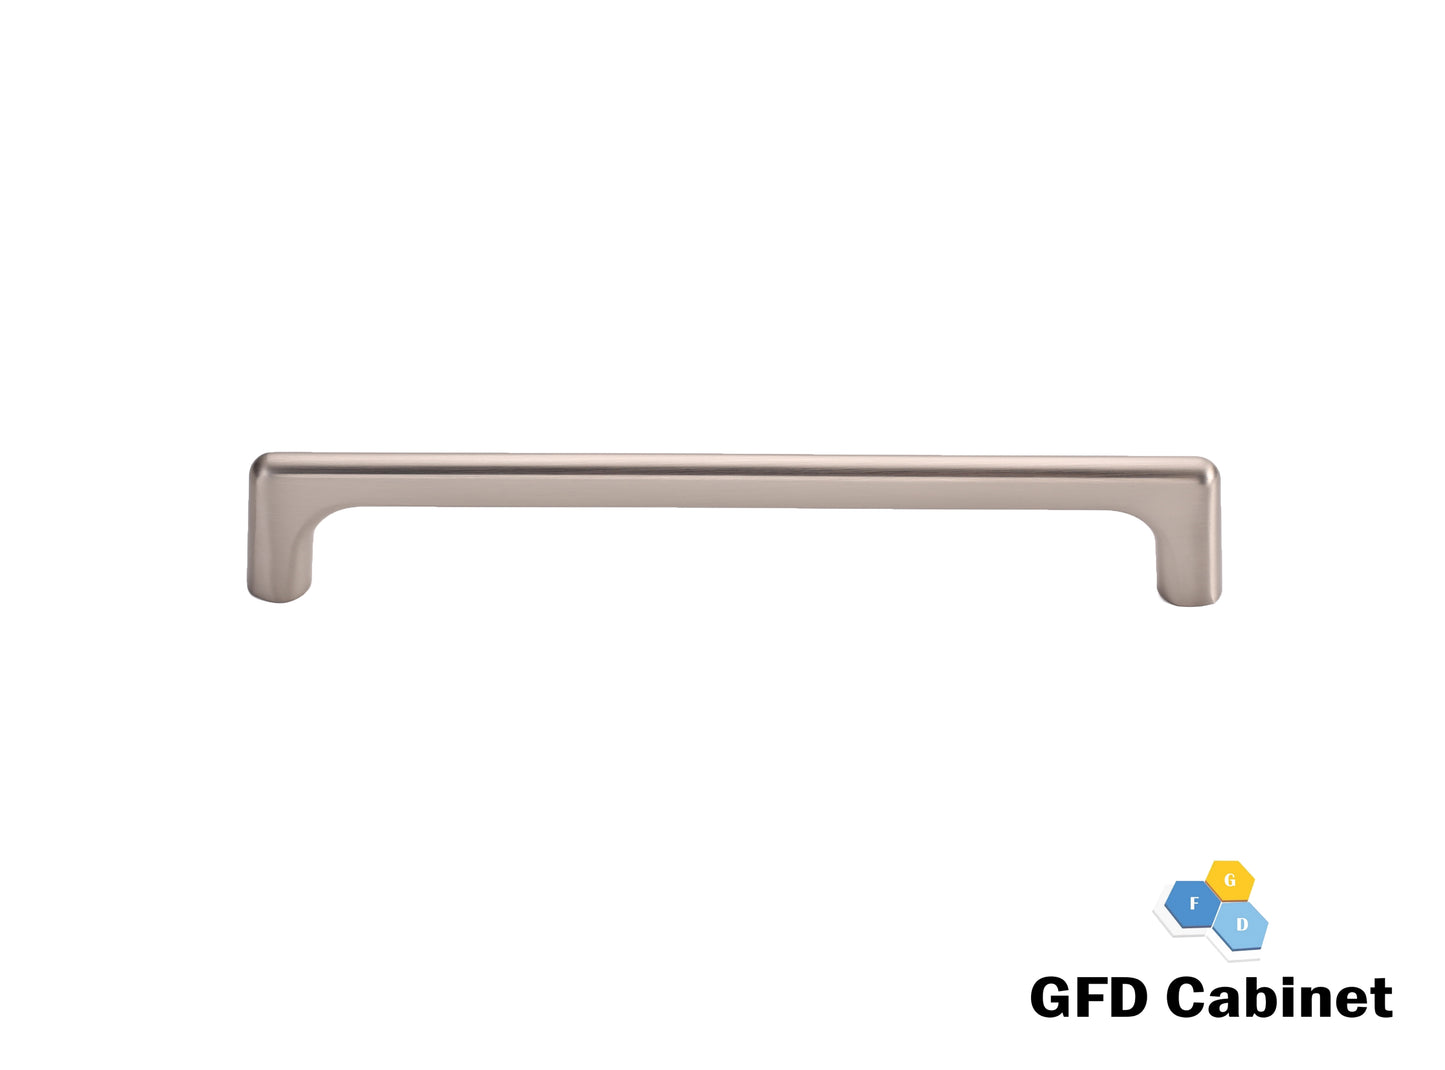 H-3307-128 5-1/16 in. (128 mm) Center-to-Center Cabinet Thin Square Pull Handle